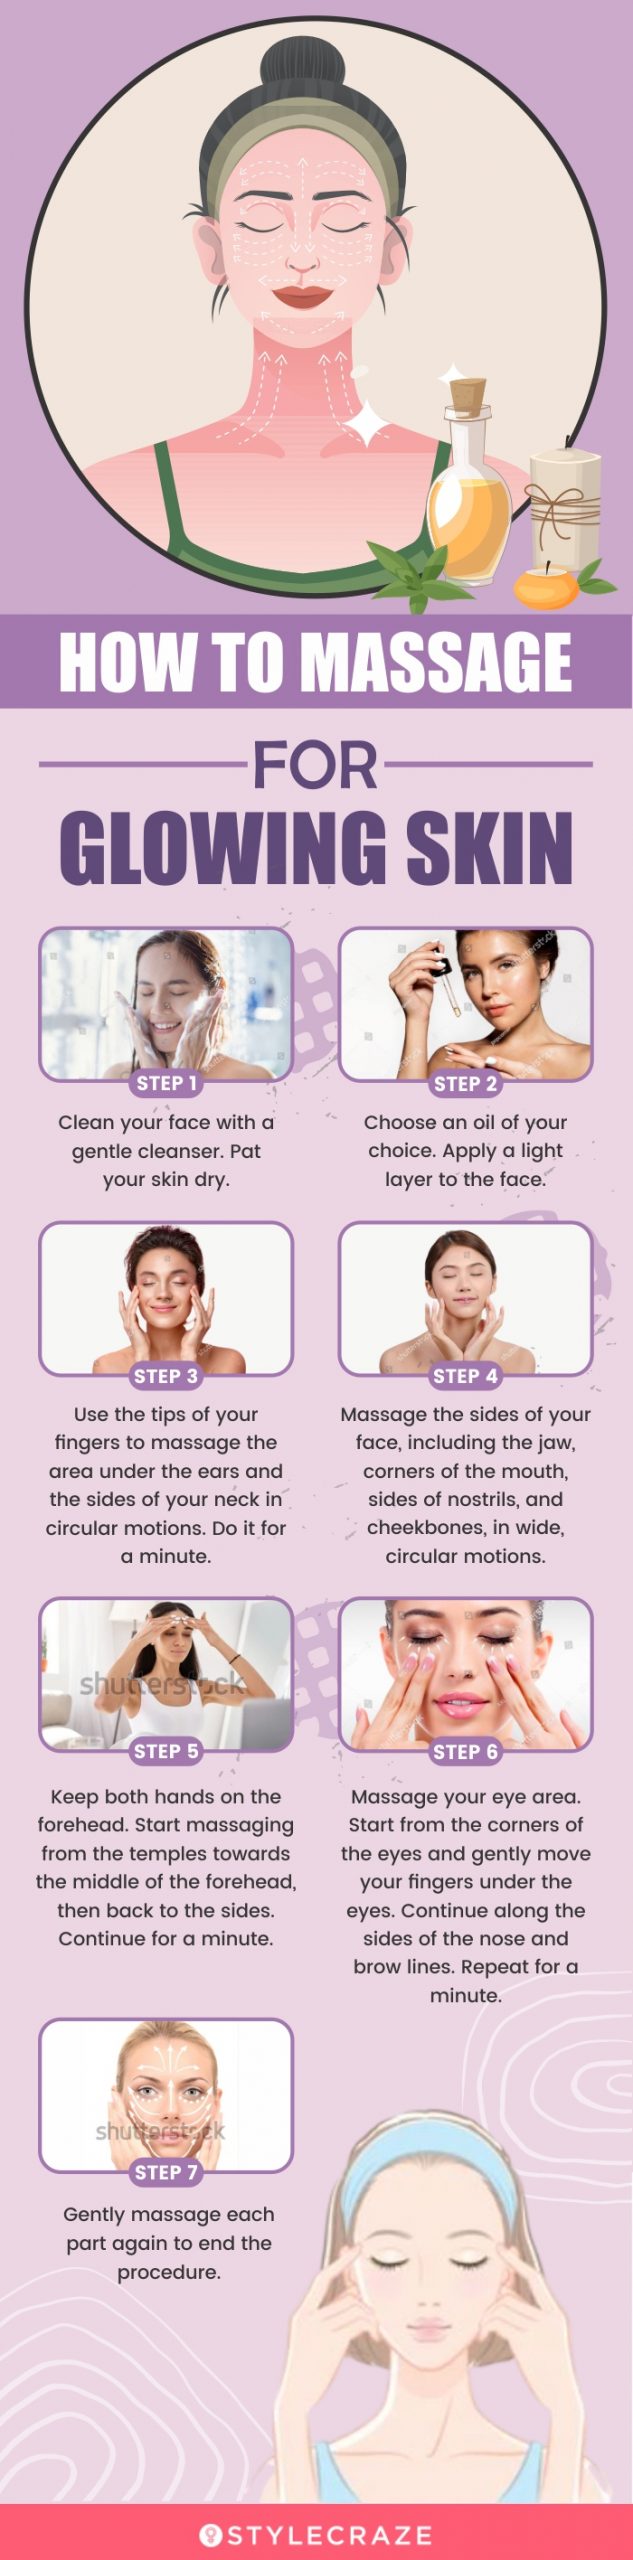 how to massage for glowing skin [infographic]